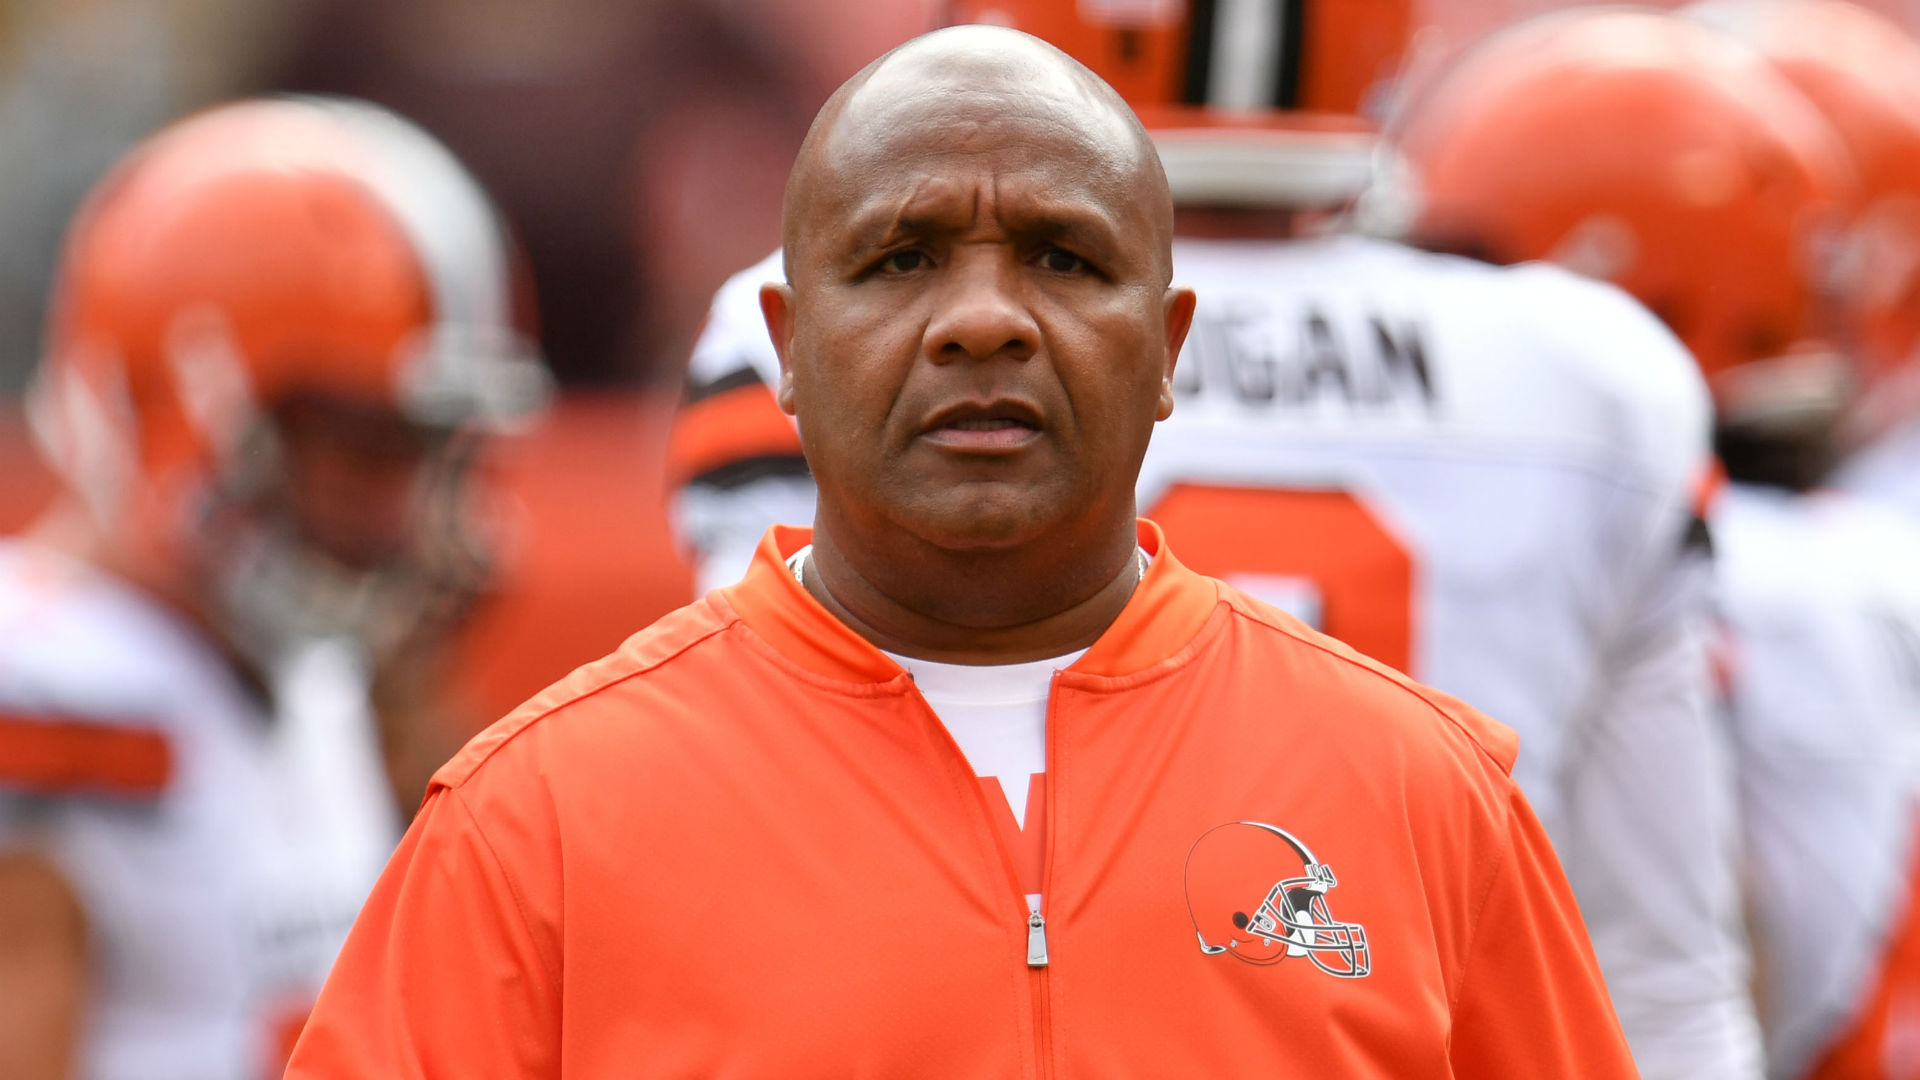 Former Browns Coach Hue Jackson Claims Cleveland S Front Office Lied About Rebuilding Plans Sporting News